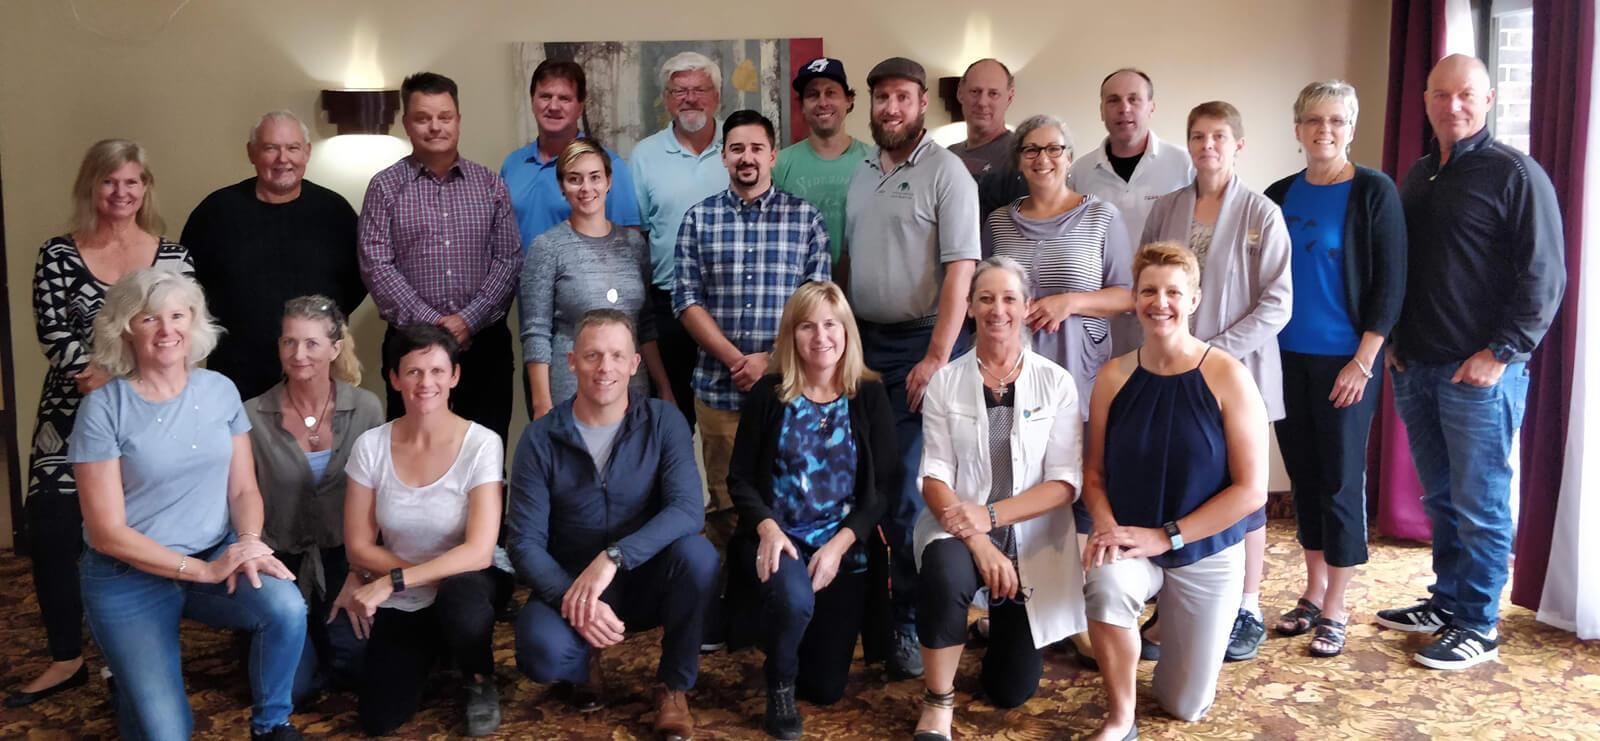 Business owners spent two days in Muskoka, learning, networking, and having fun.